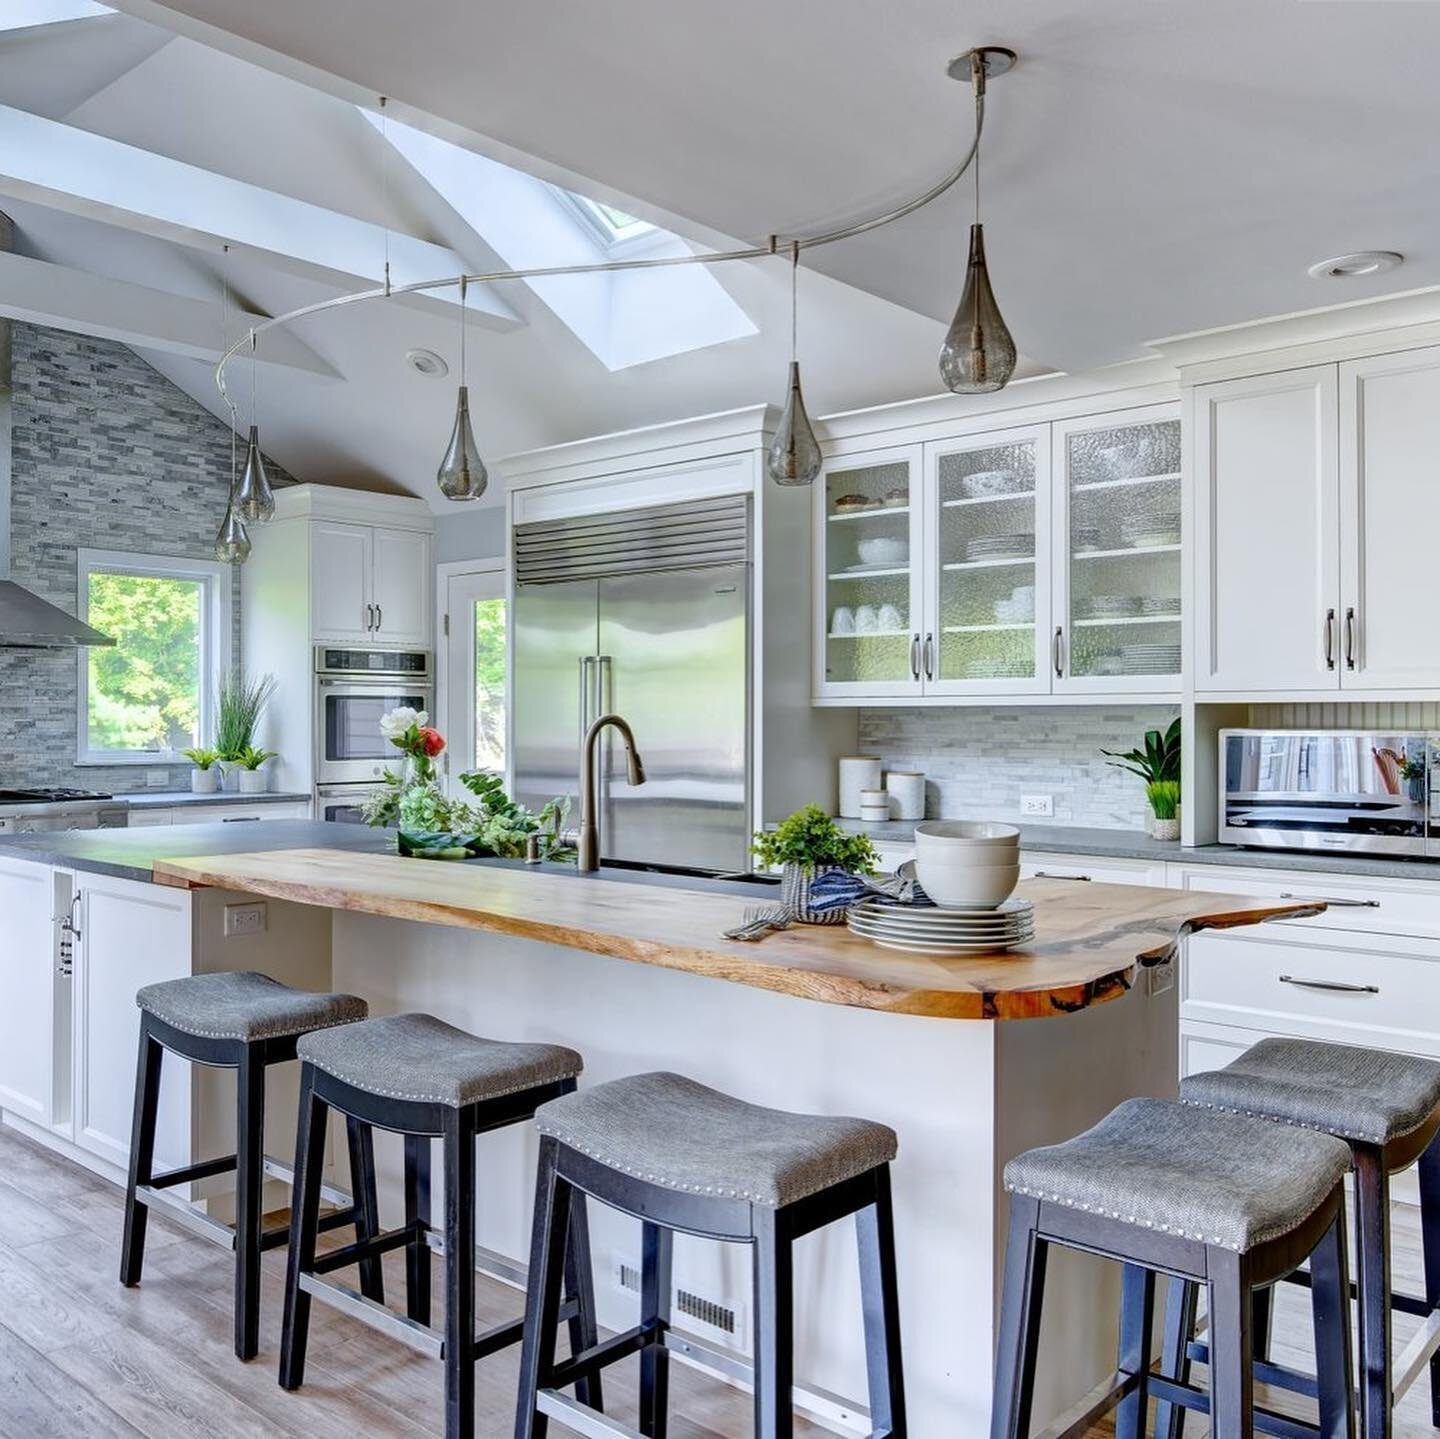 The hottest kitchen island trends of 2023:
🔥 Contrasting colors and materials
🔥 Multi-functional islands
🔥 Waterfall countertops
🔥 #openshelving 
🔥 Bold Lighting

Which one(s) are your favorite? 

#kitchendesign #kitchenisland #kitchenremodel